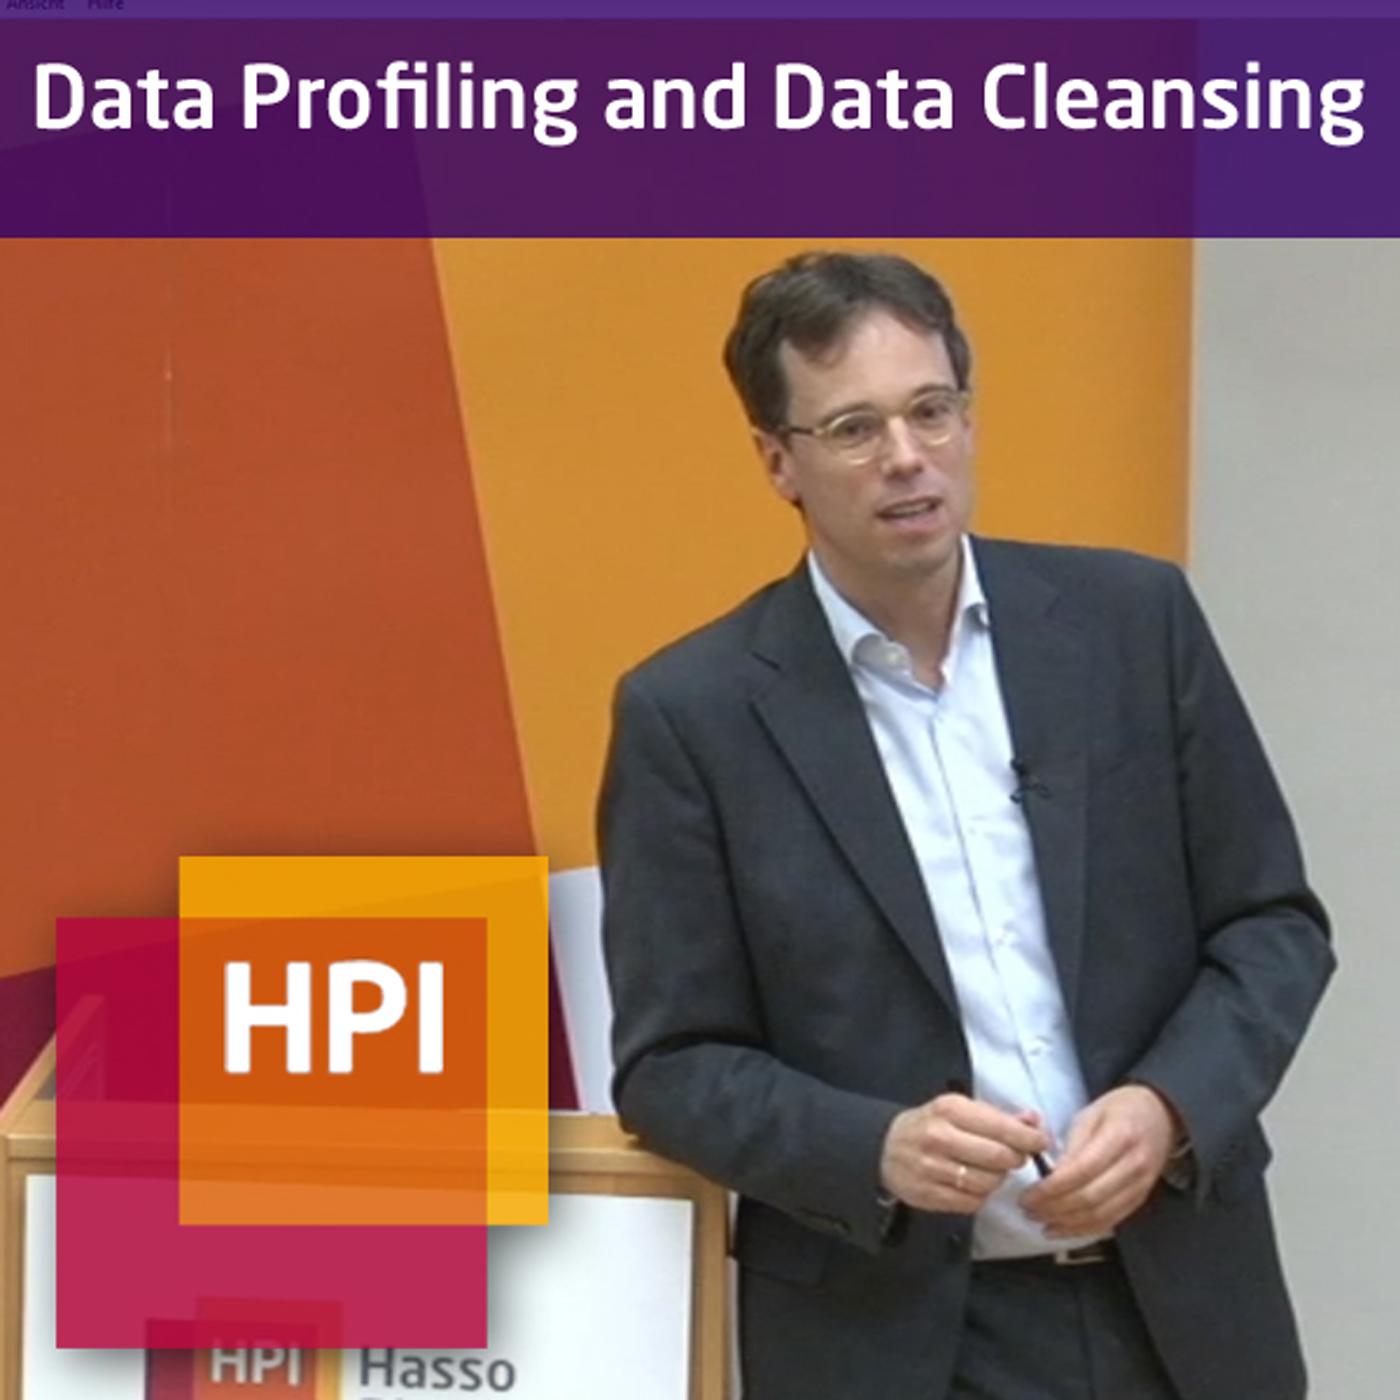 Data Profiling and Data Cleansing (WS 2014/15) - tele-TASK